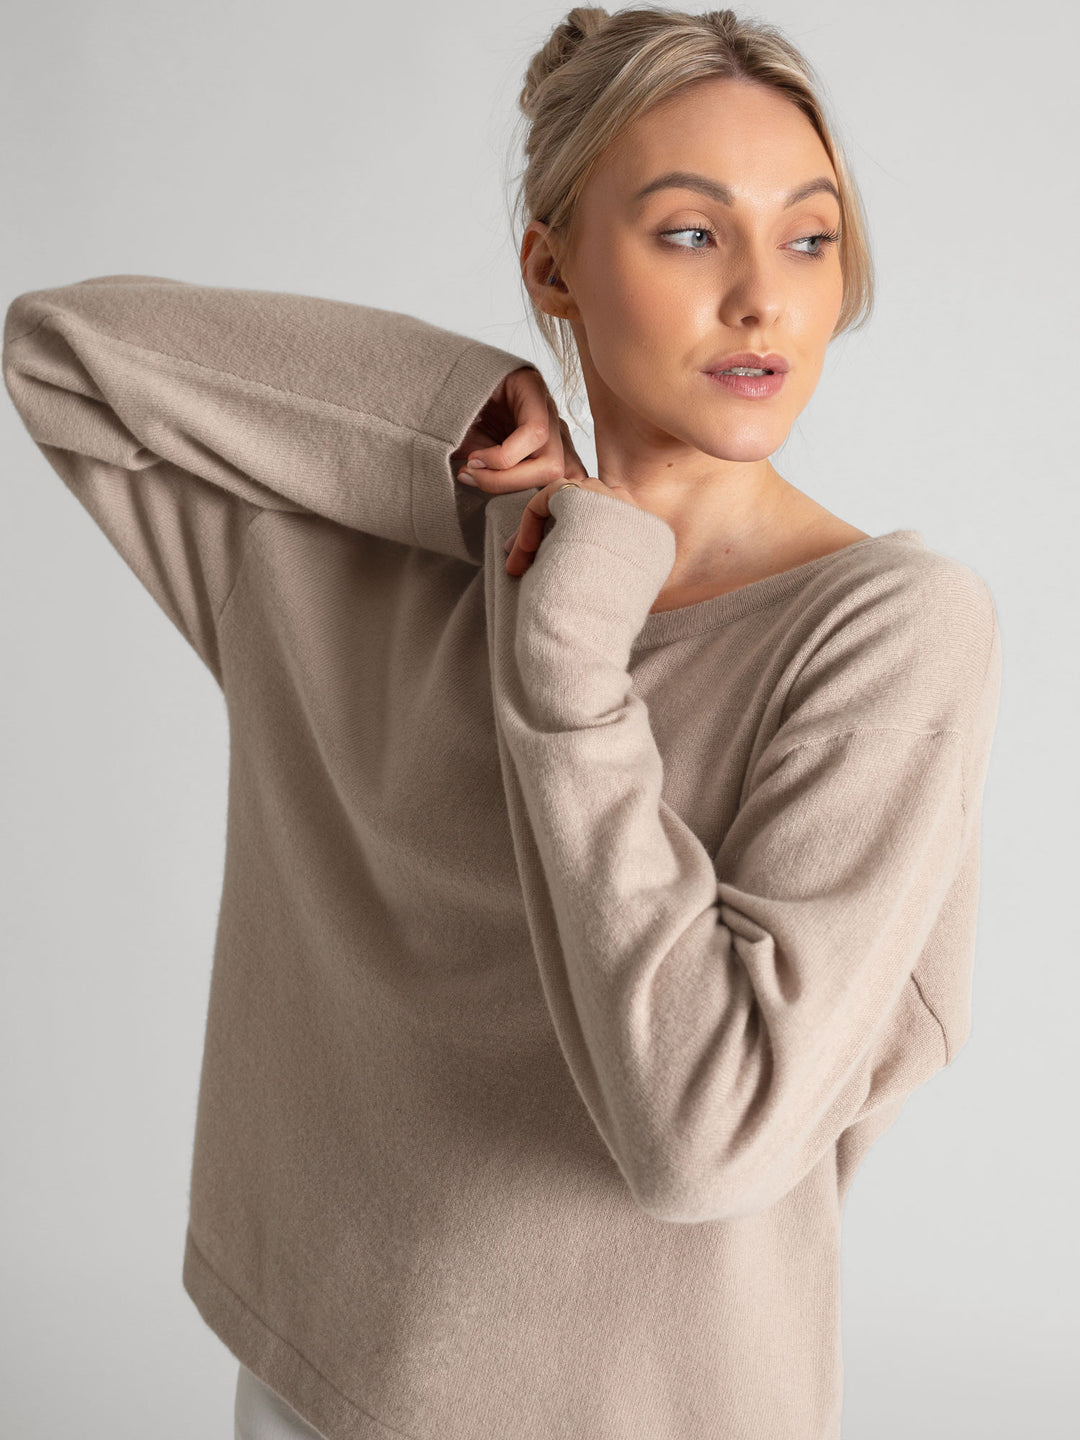 Wide neck cashmere sweater, in 100% pure cashmere. Scandinavian design by Kashmina. Color: Feather.